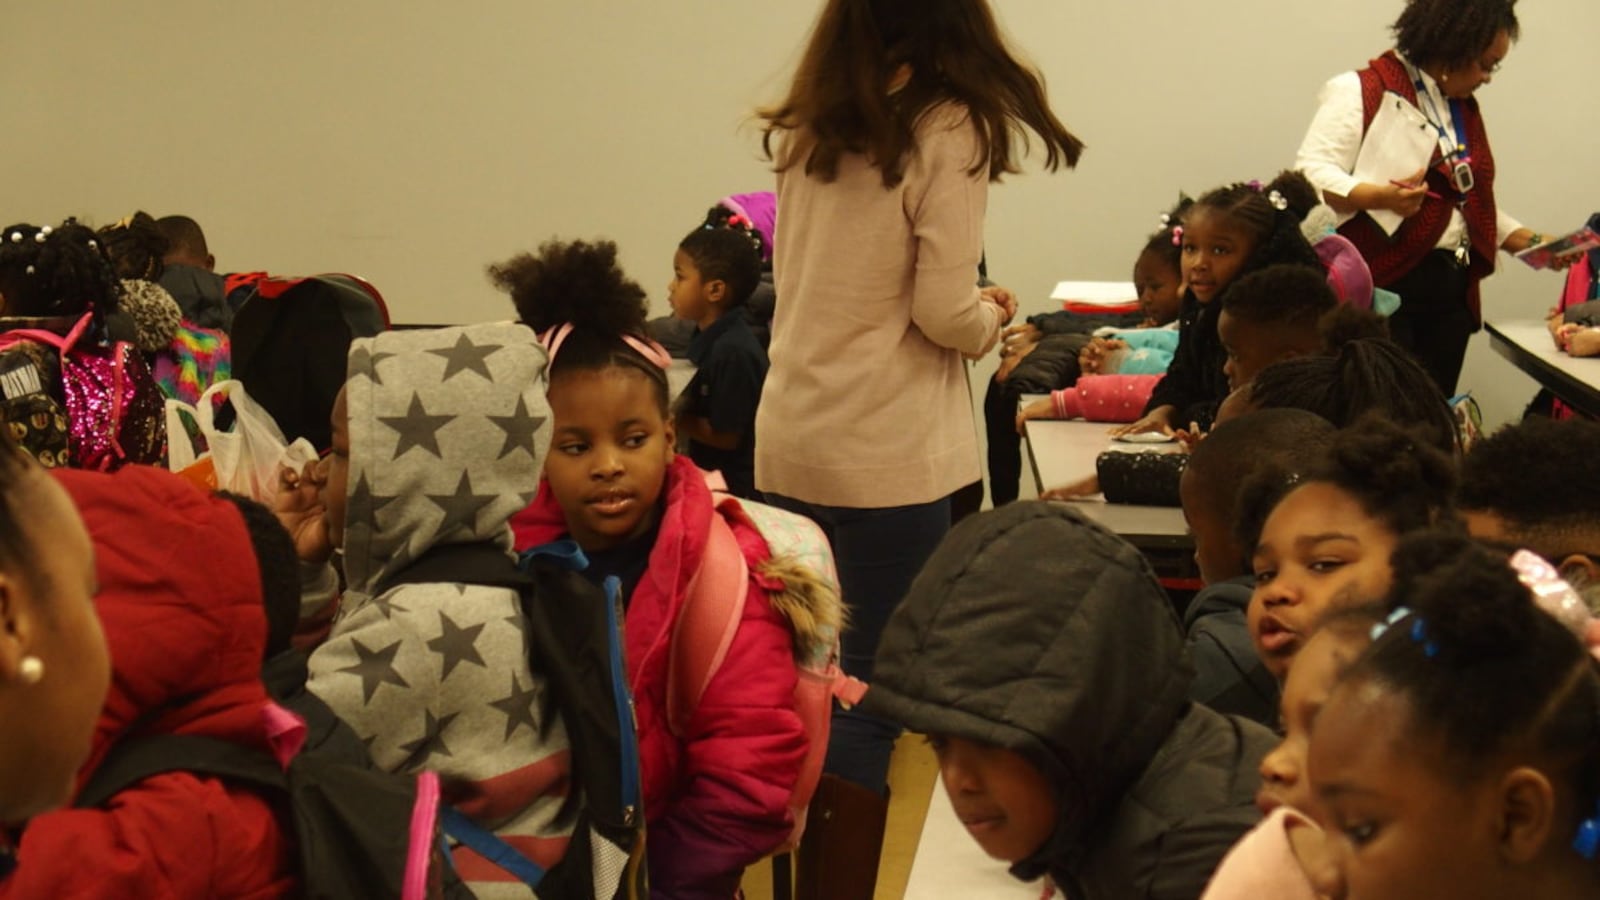 Students arrive for the start of the school day at Memphis Delta Preparatory, one of the charter schools in limbo after the school board deferred a closure vote in October 2018.